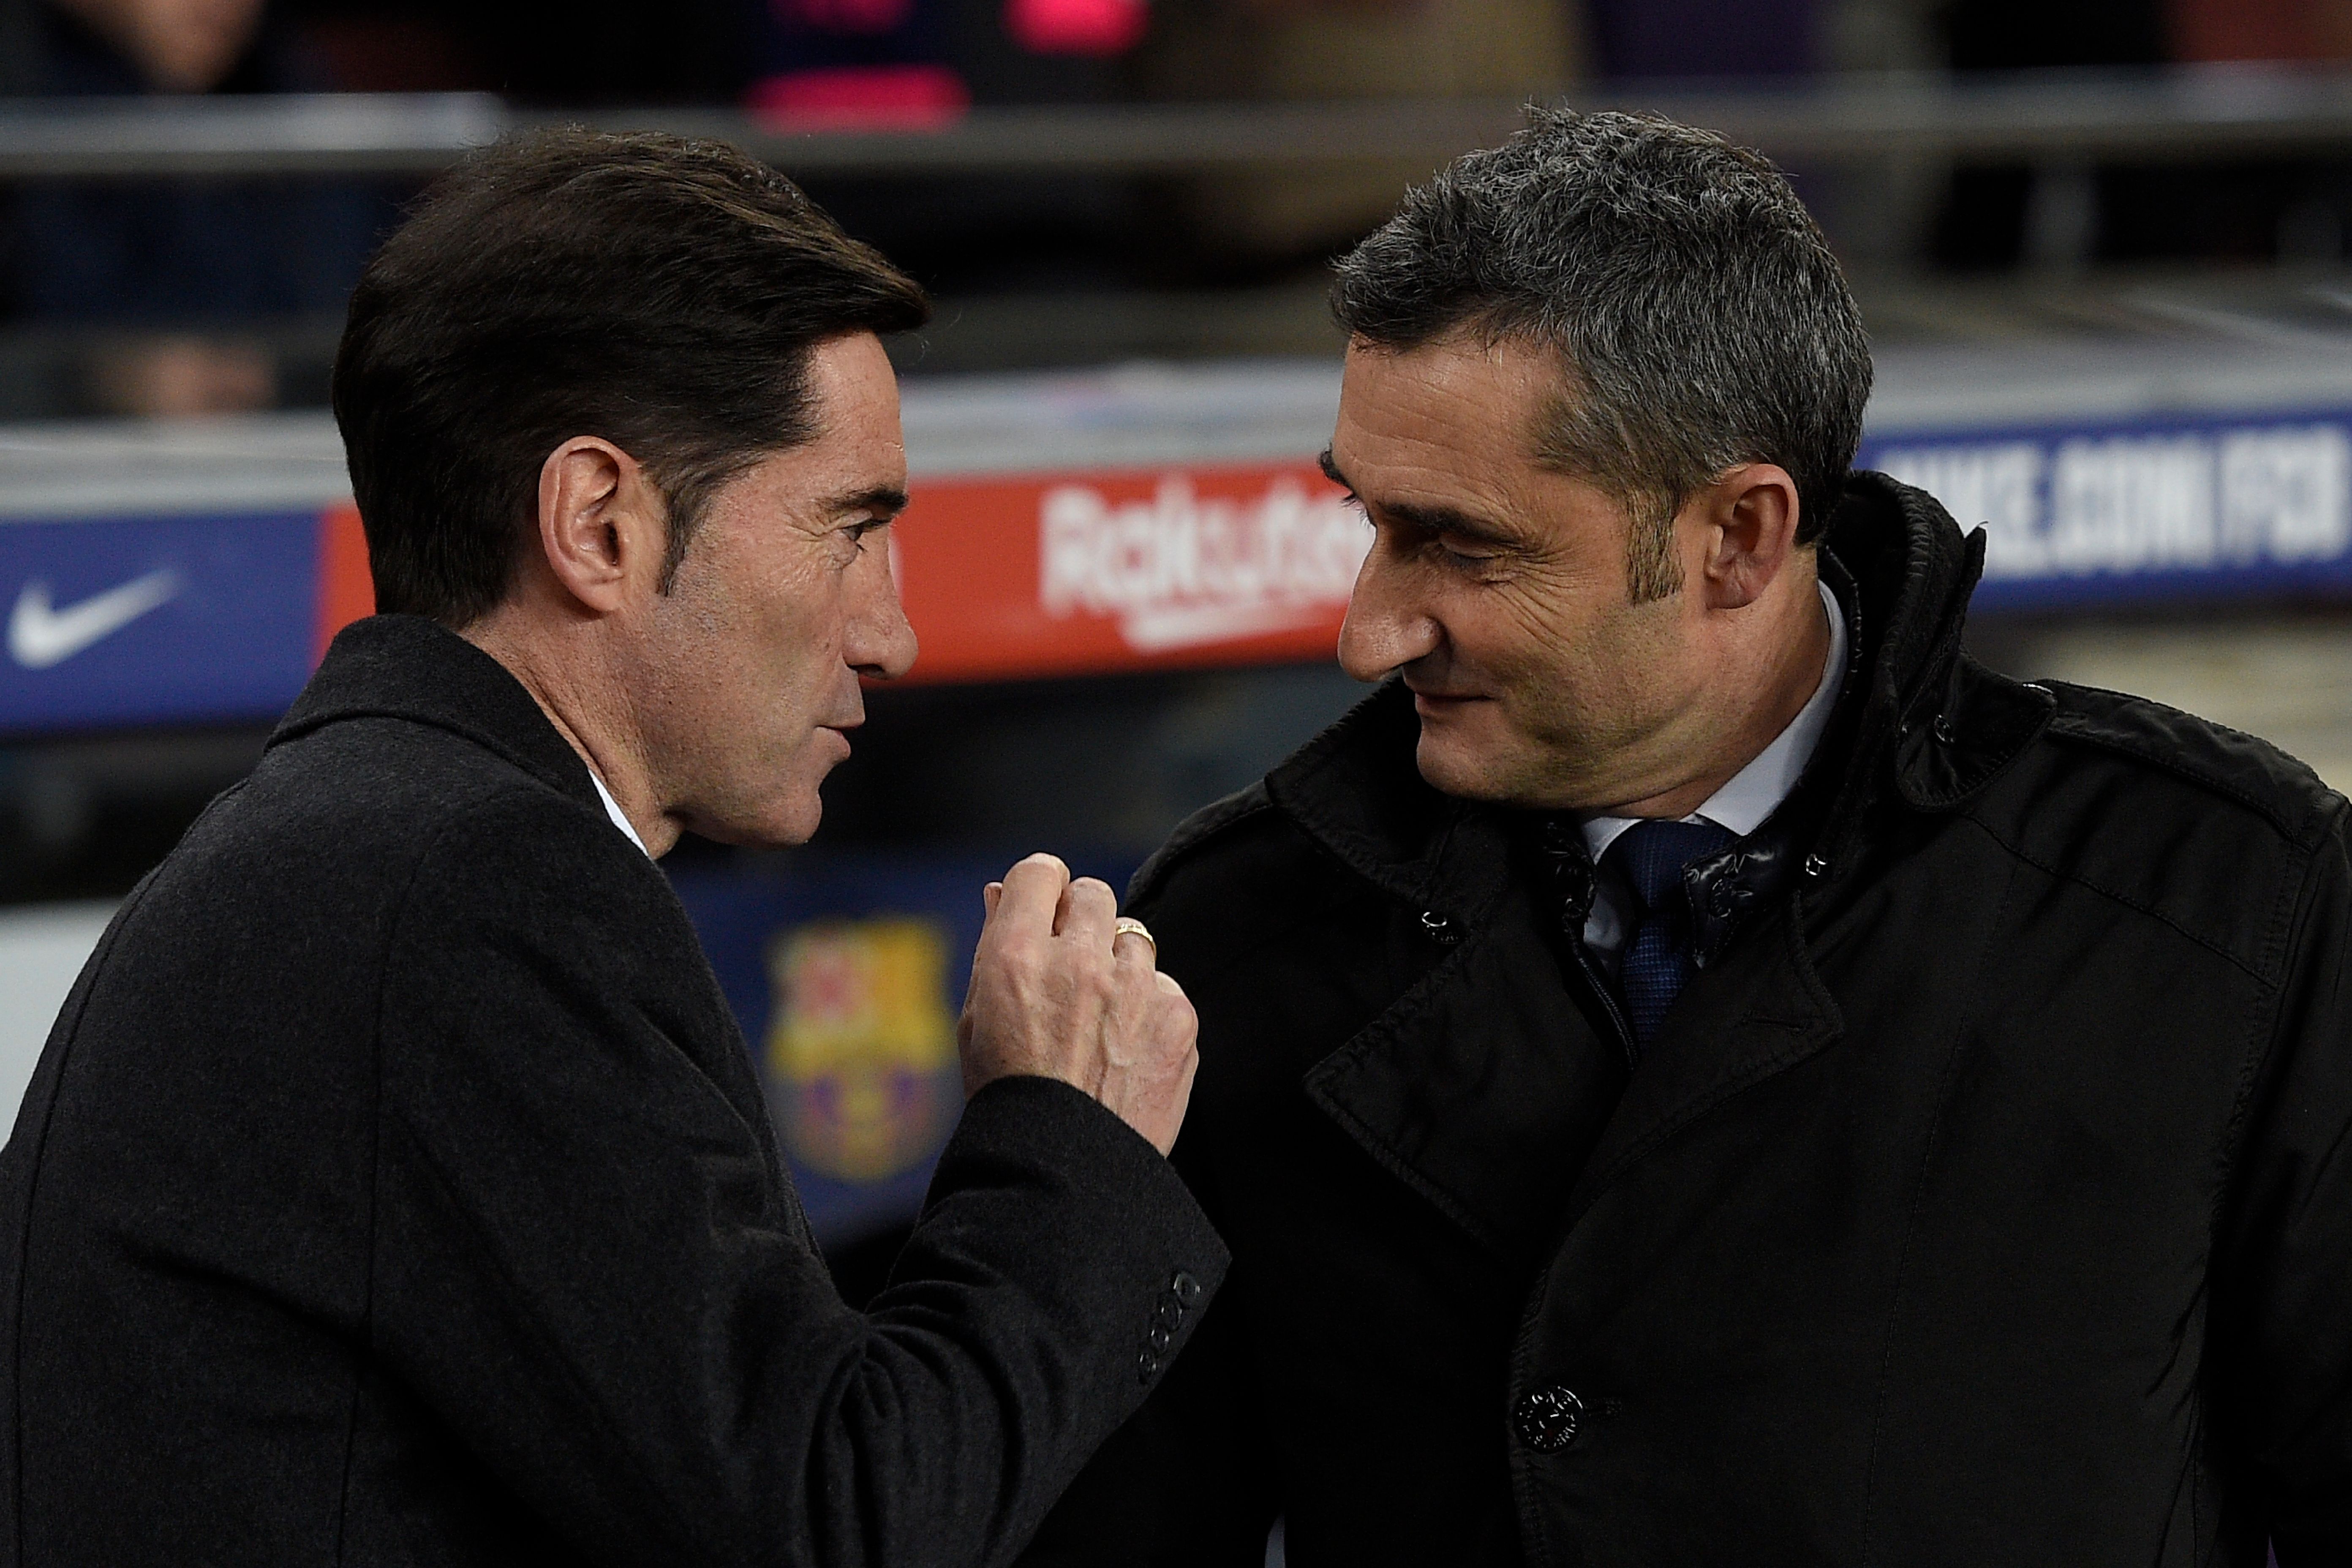 Valencia's Spanish coach Marcelino Garcia Toral (L) speaks with Barcelona's Spanish coach Ernesto Valverde before the Spanish league football match FC Barcelona against Valencia CF at the Camp Nou stadium in Barcelona on February 2, 2019. (Photo by LLUIS GENE / AFP)        (Photo credit should read LLUIS GENE/AFP/Getty Images)